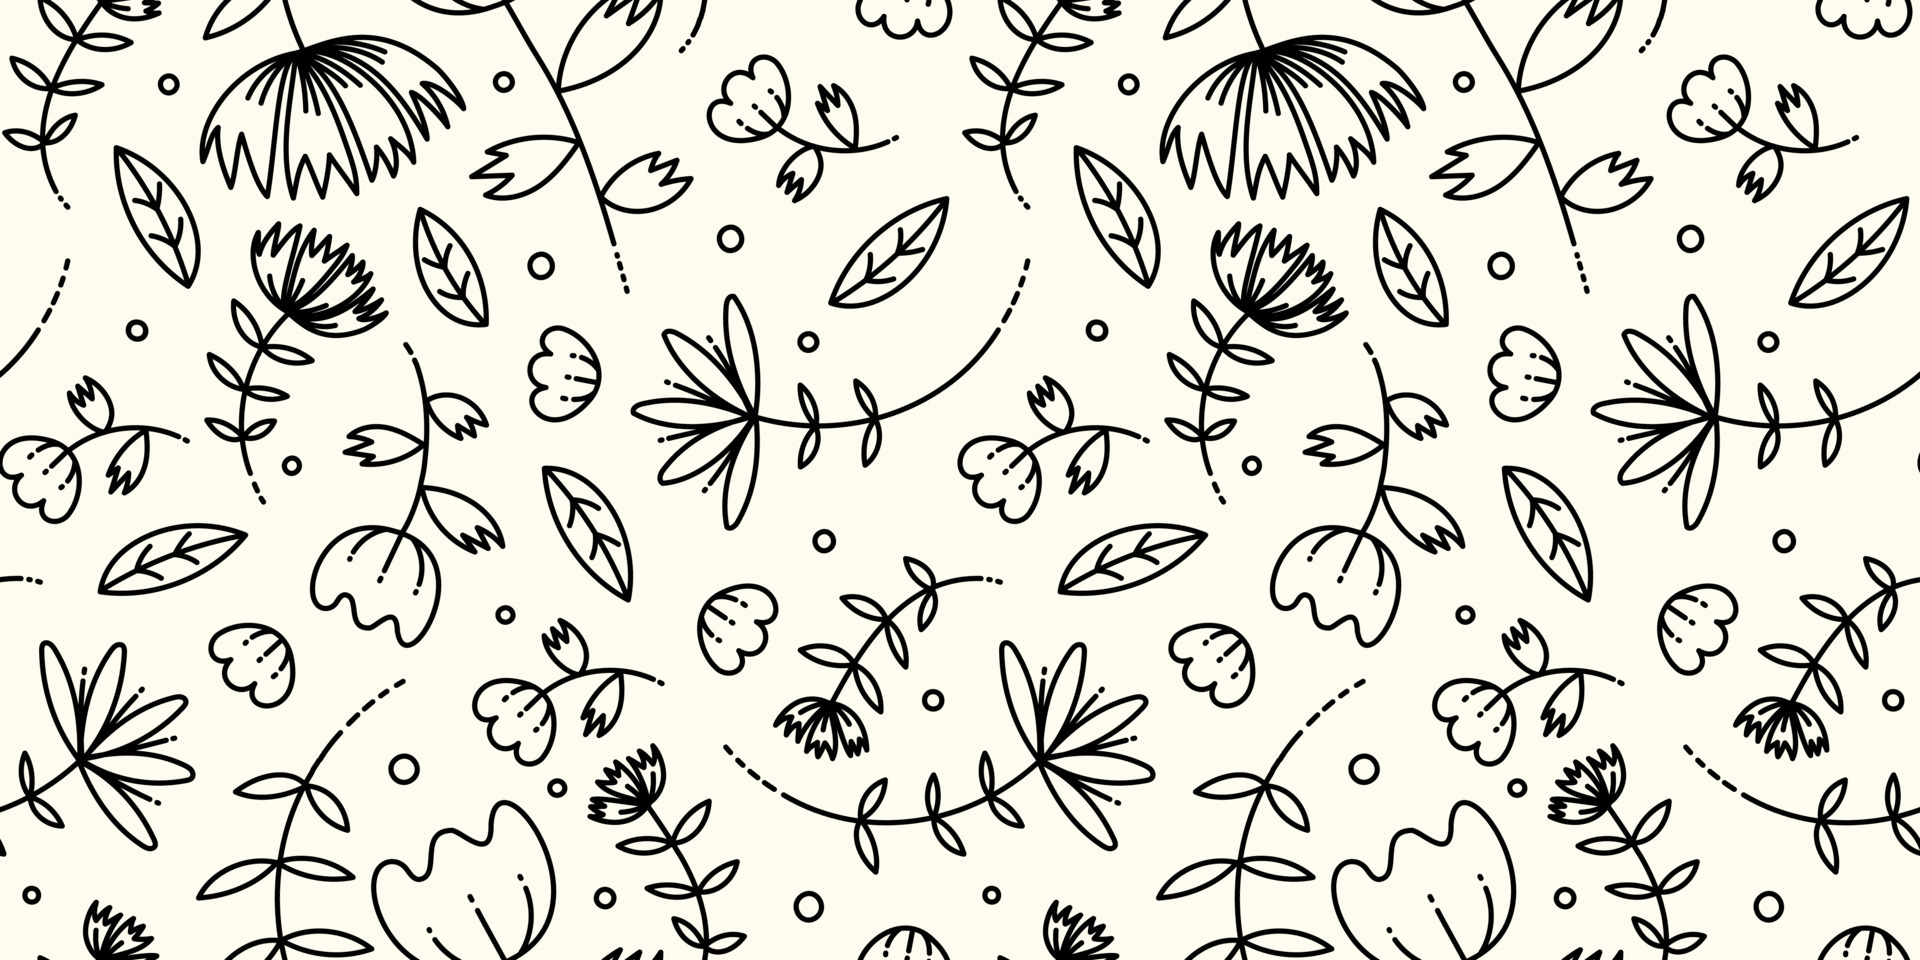 Seamless pattern of drawn contour flowers. Print for fabric or